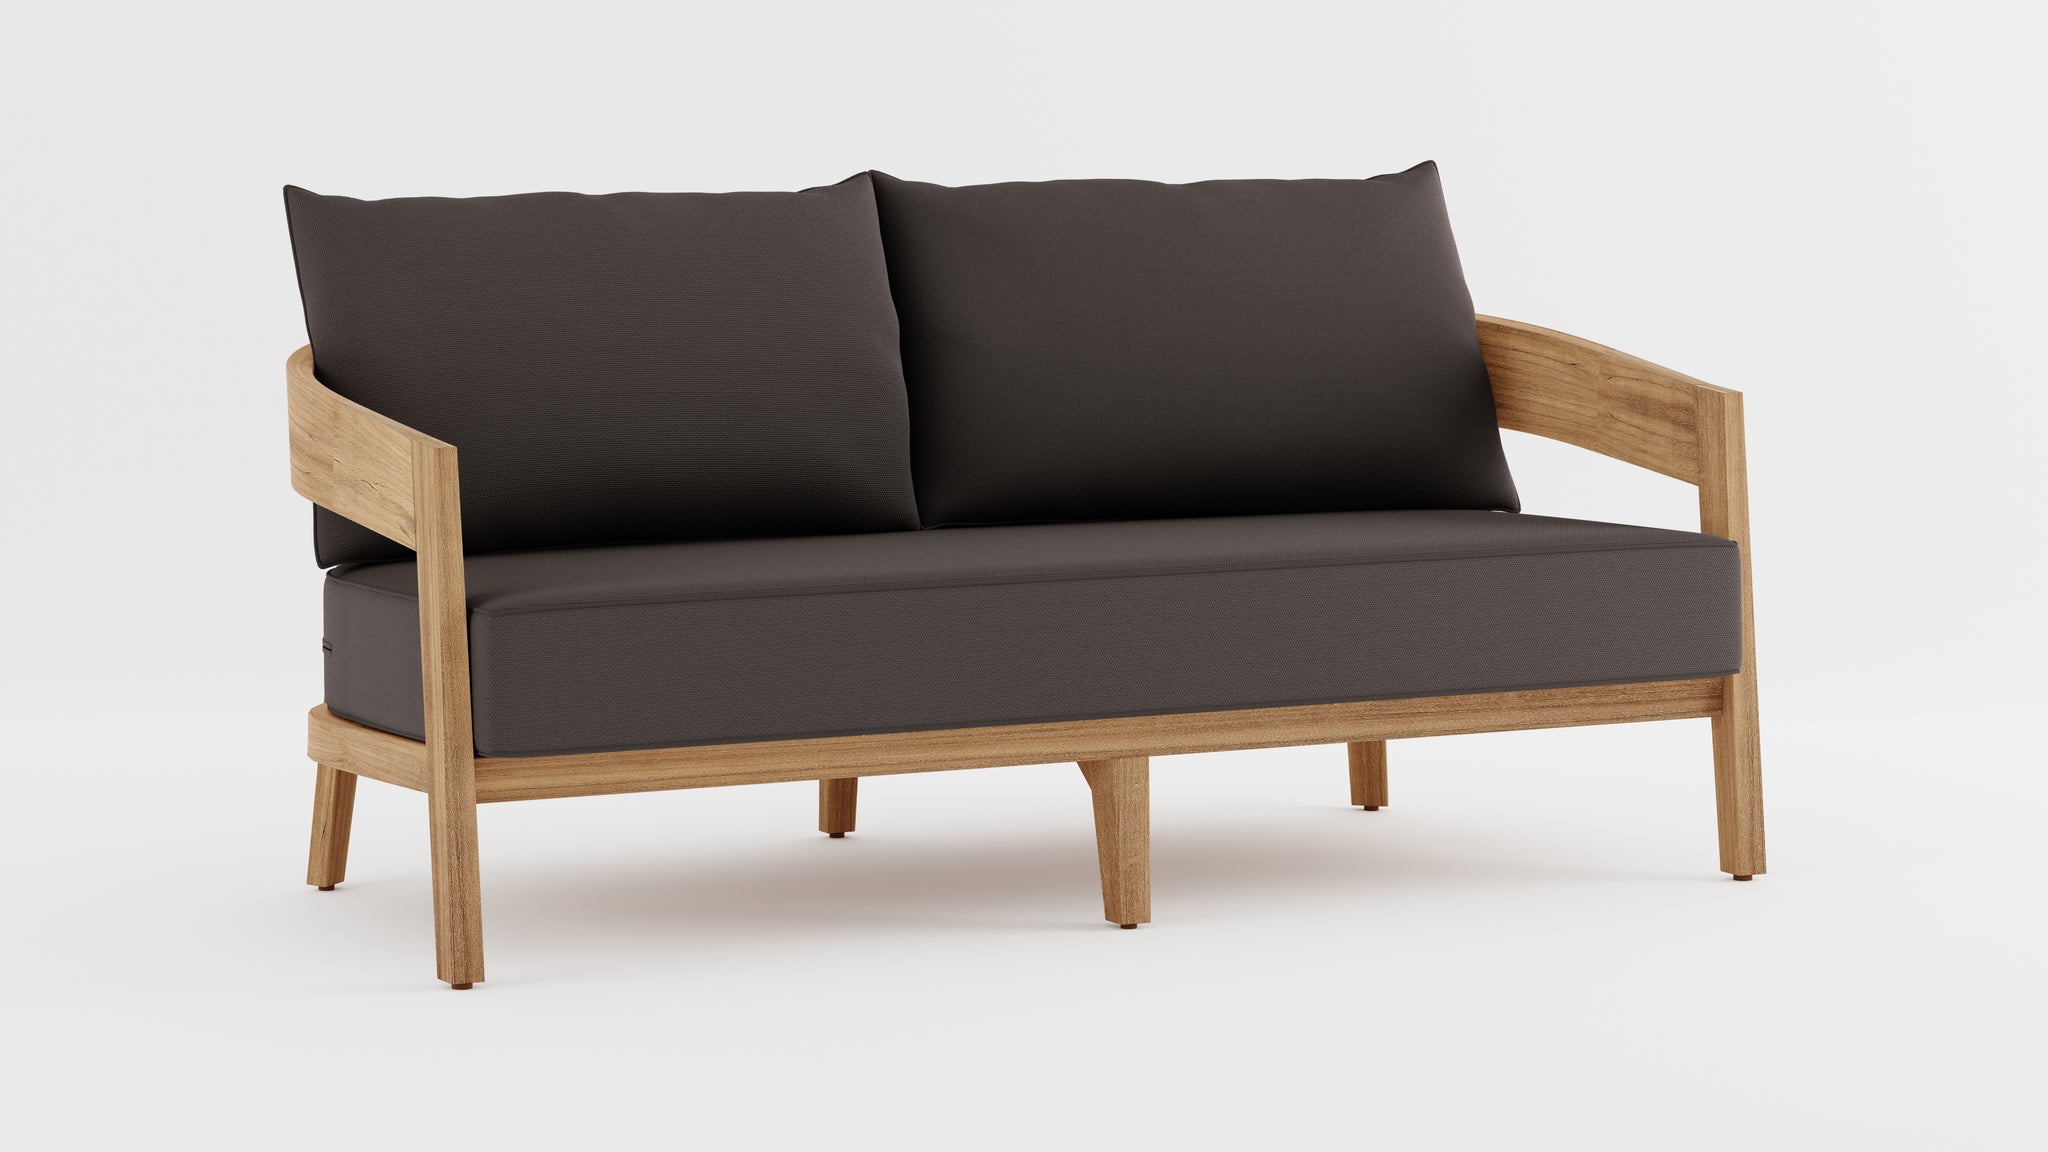 The Windsor Outdoor Teak Lounge 2 Seater Sofa  with Graphite Cushions